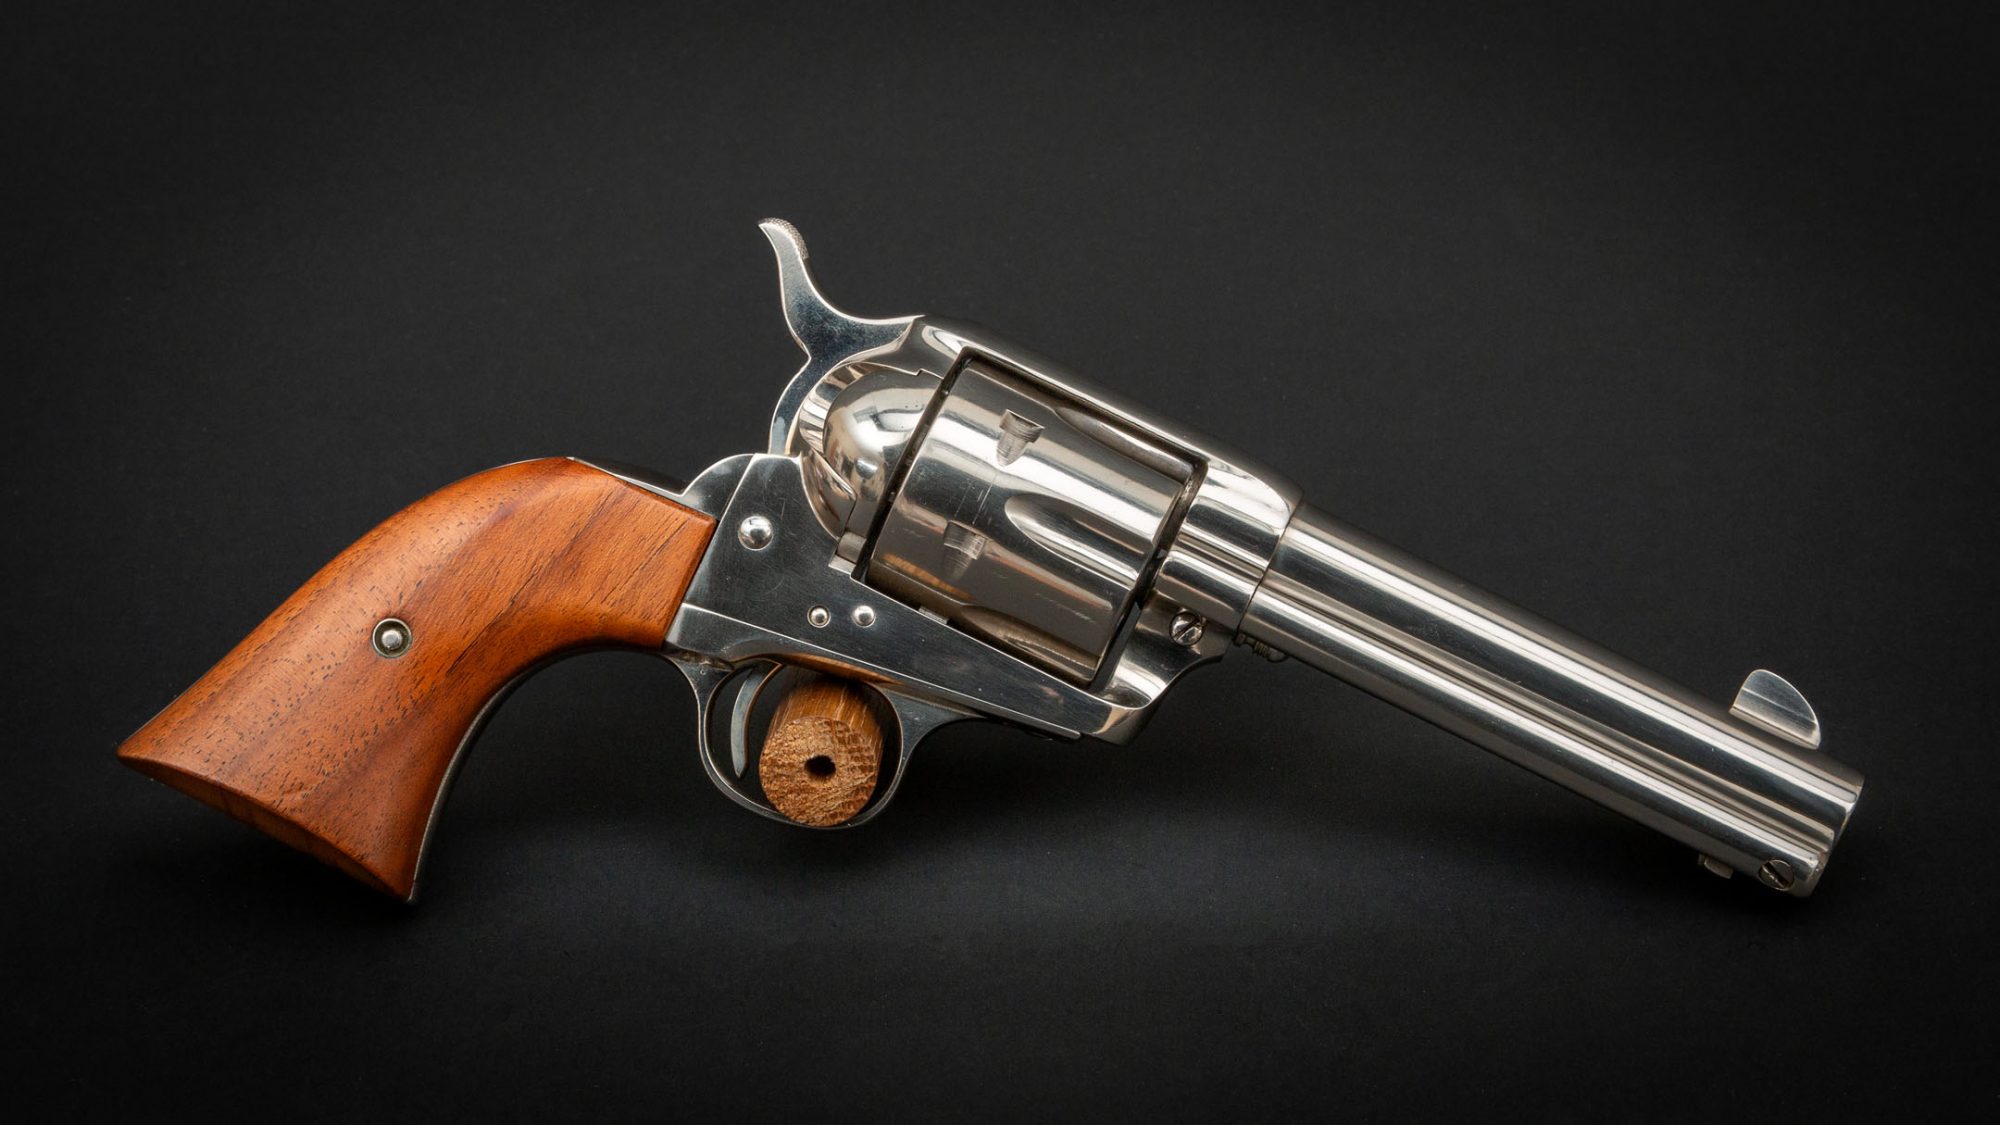 Colt Single Action Army revolver from 1899 chambered in 45 Colt, for sale by Turnbull Restoration Co. of Bloomfield, NY